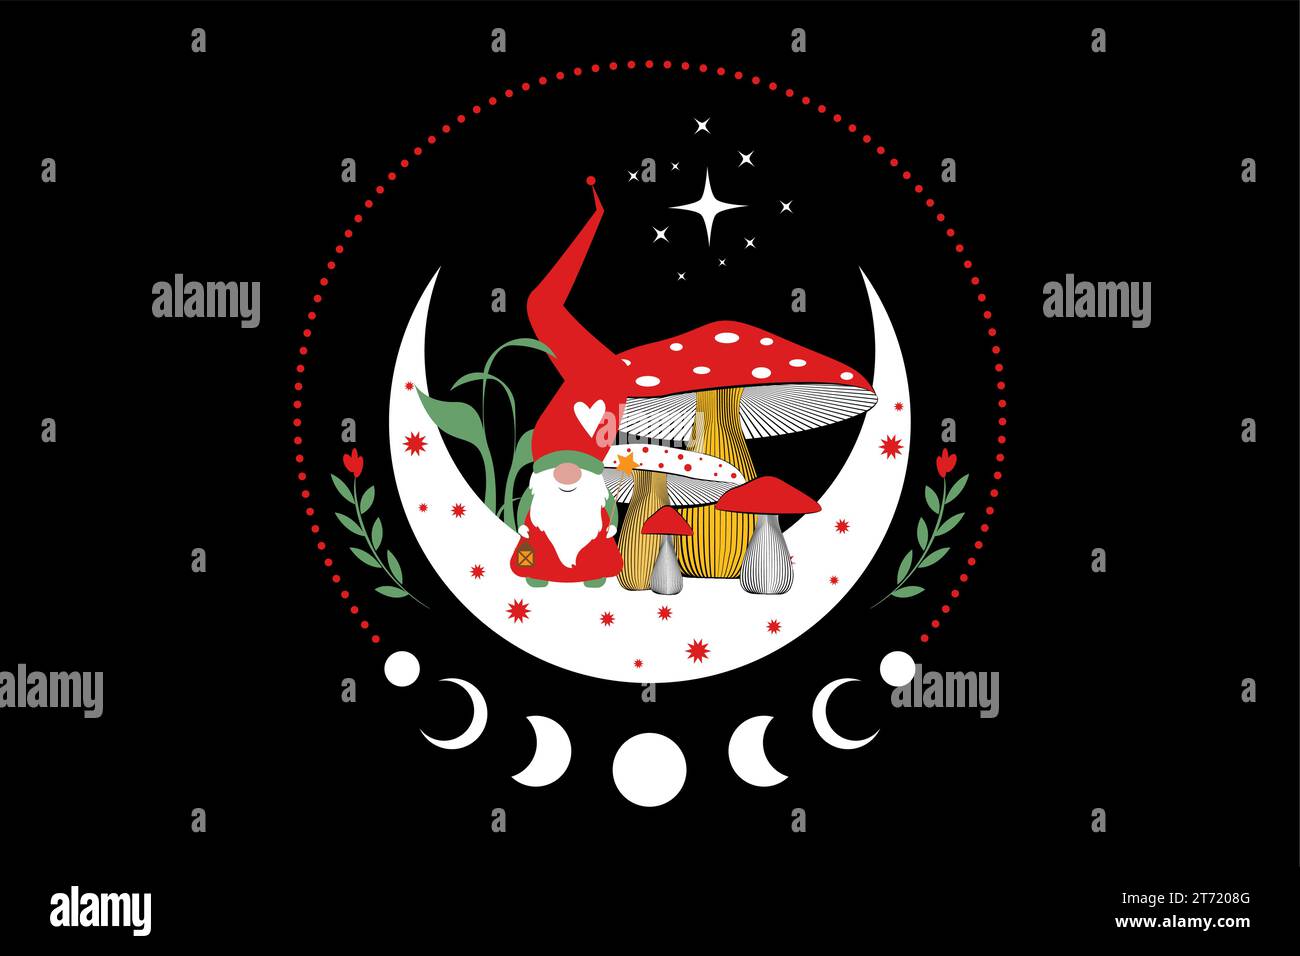 Magic Gnome in the mystical woods of mushrooms on crescent moon and stars. Christmas concept symbol, witchy esoteric fungus and moon phases. Magical Stock Vector